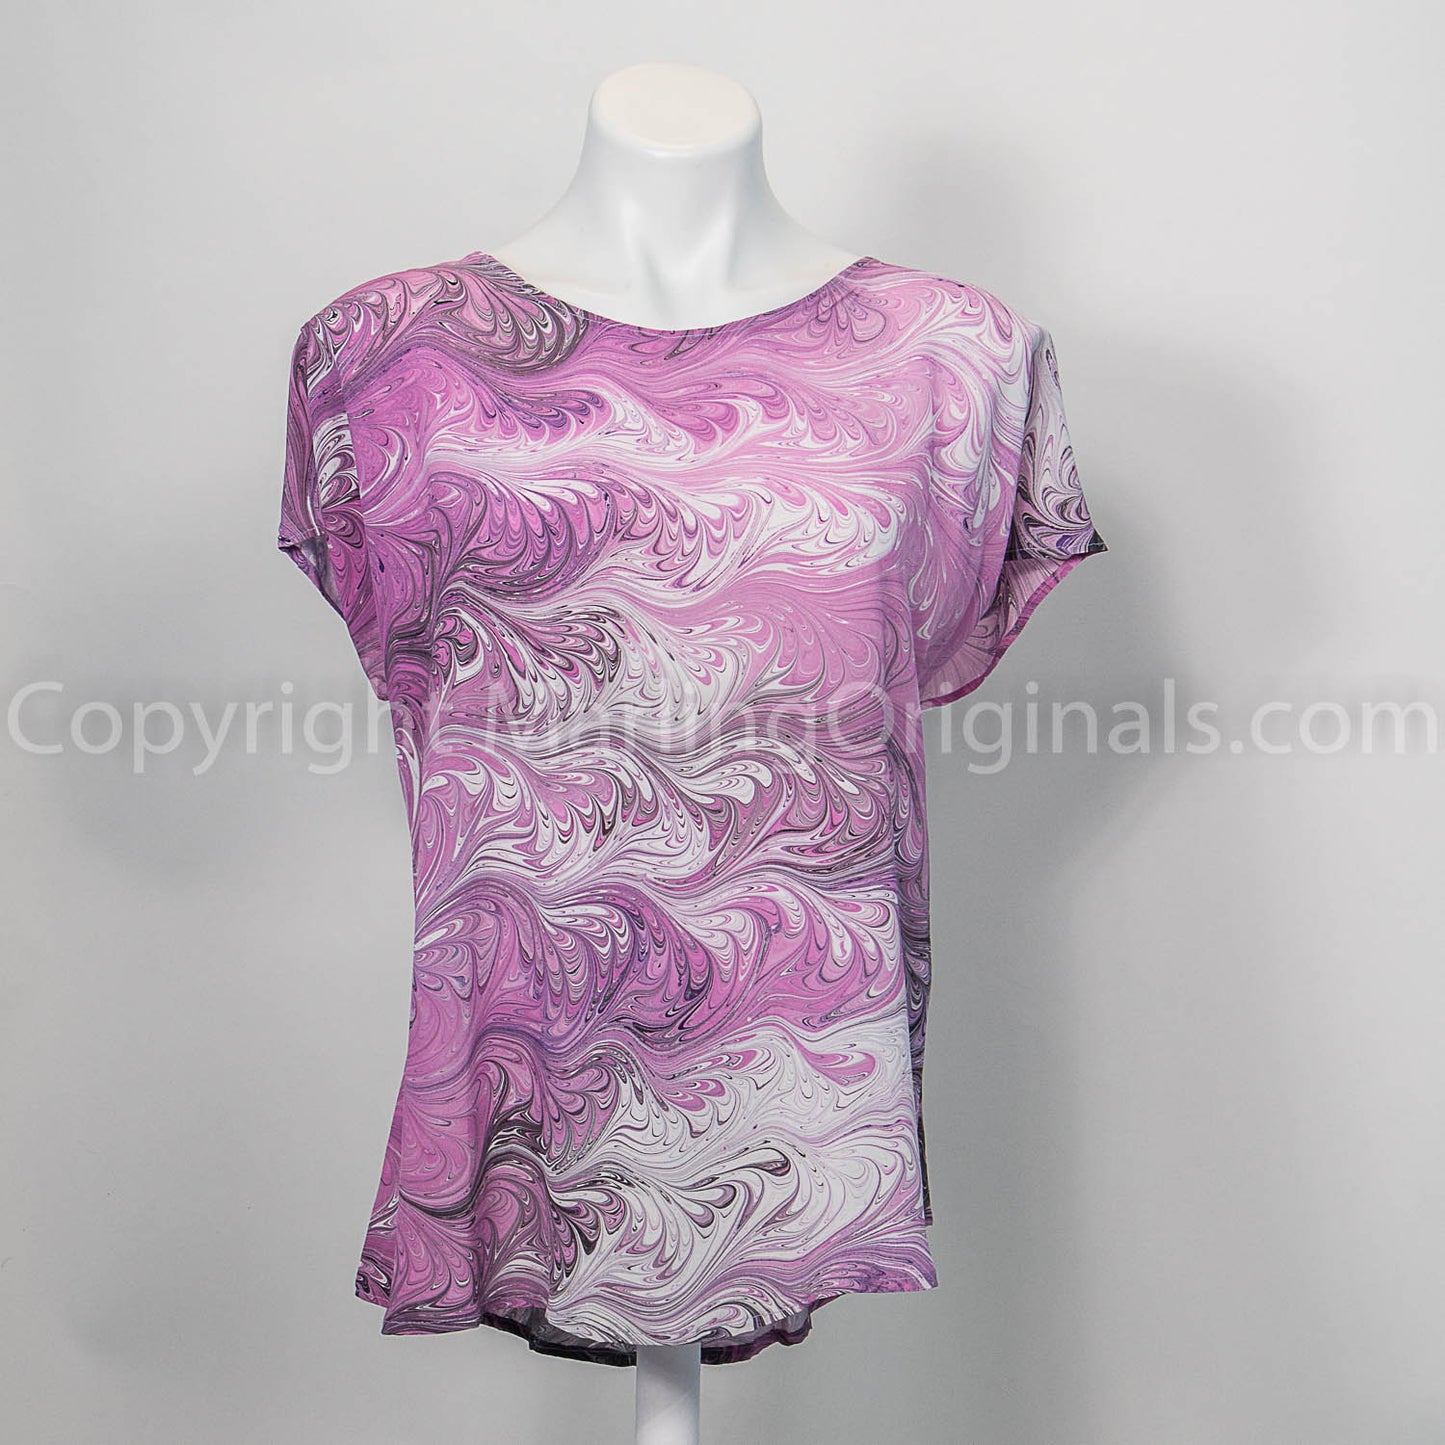 short sleeve silk crepe de chine top marbled in pink, black and white feathered design